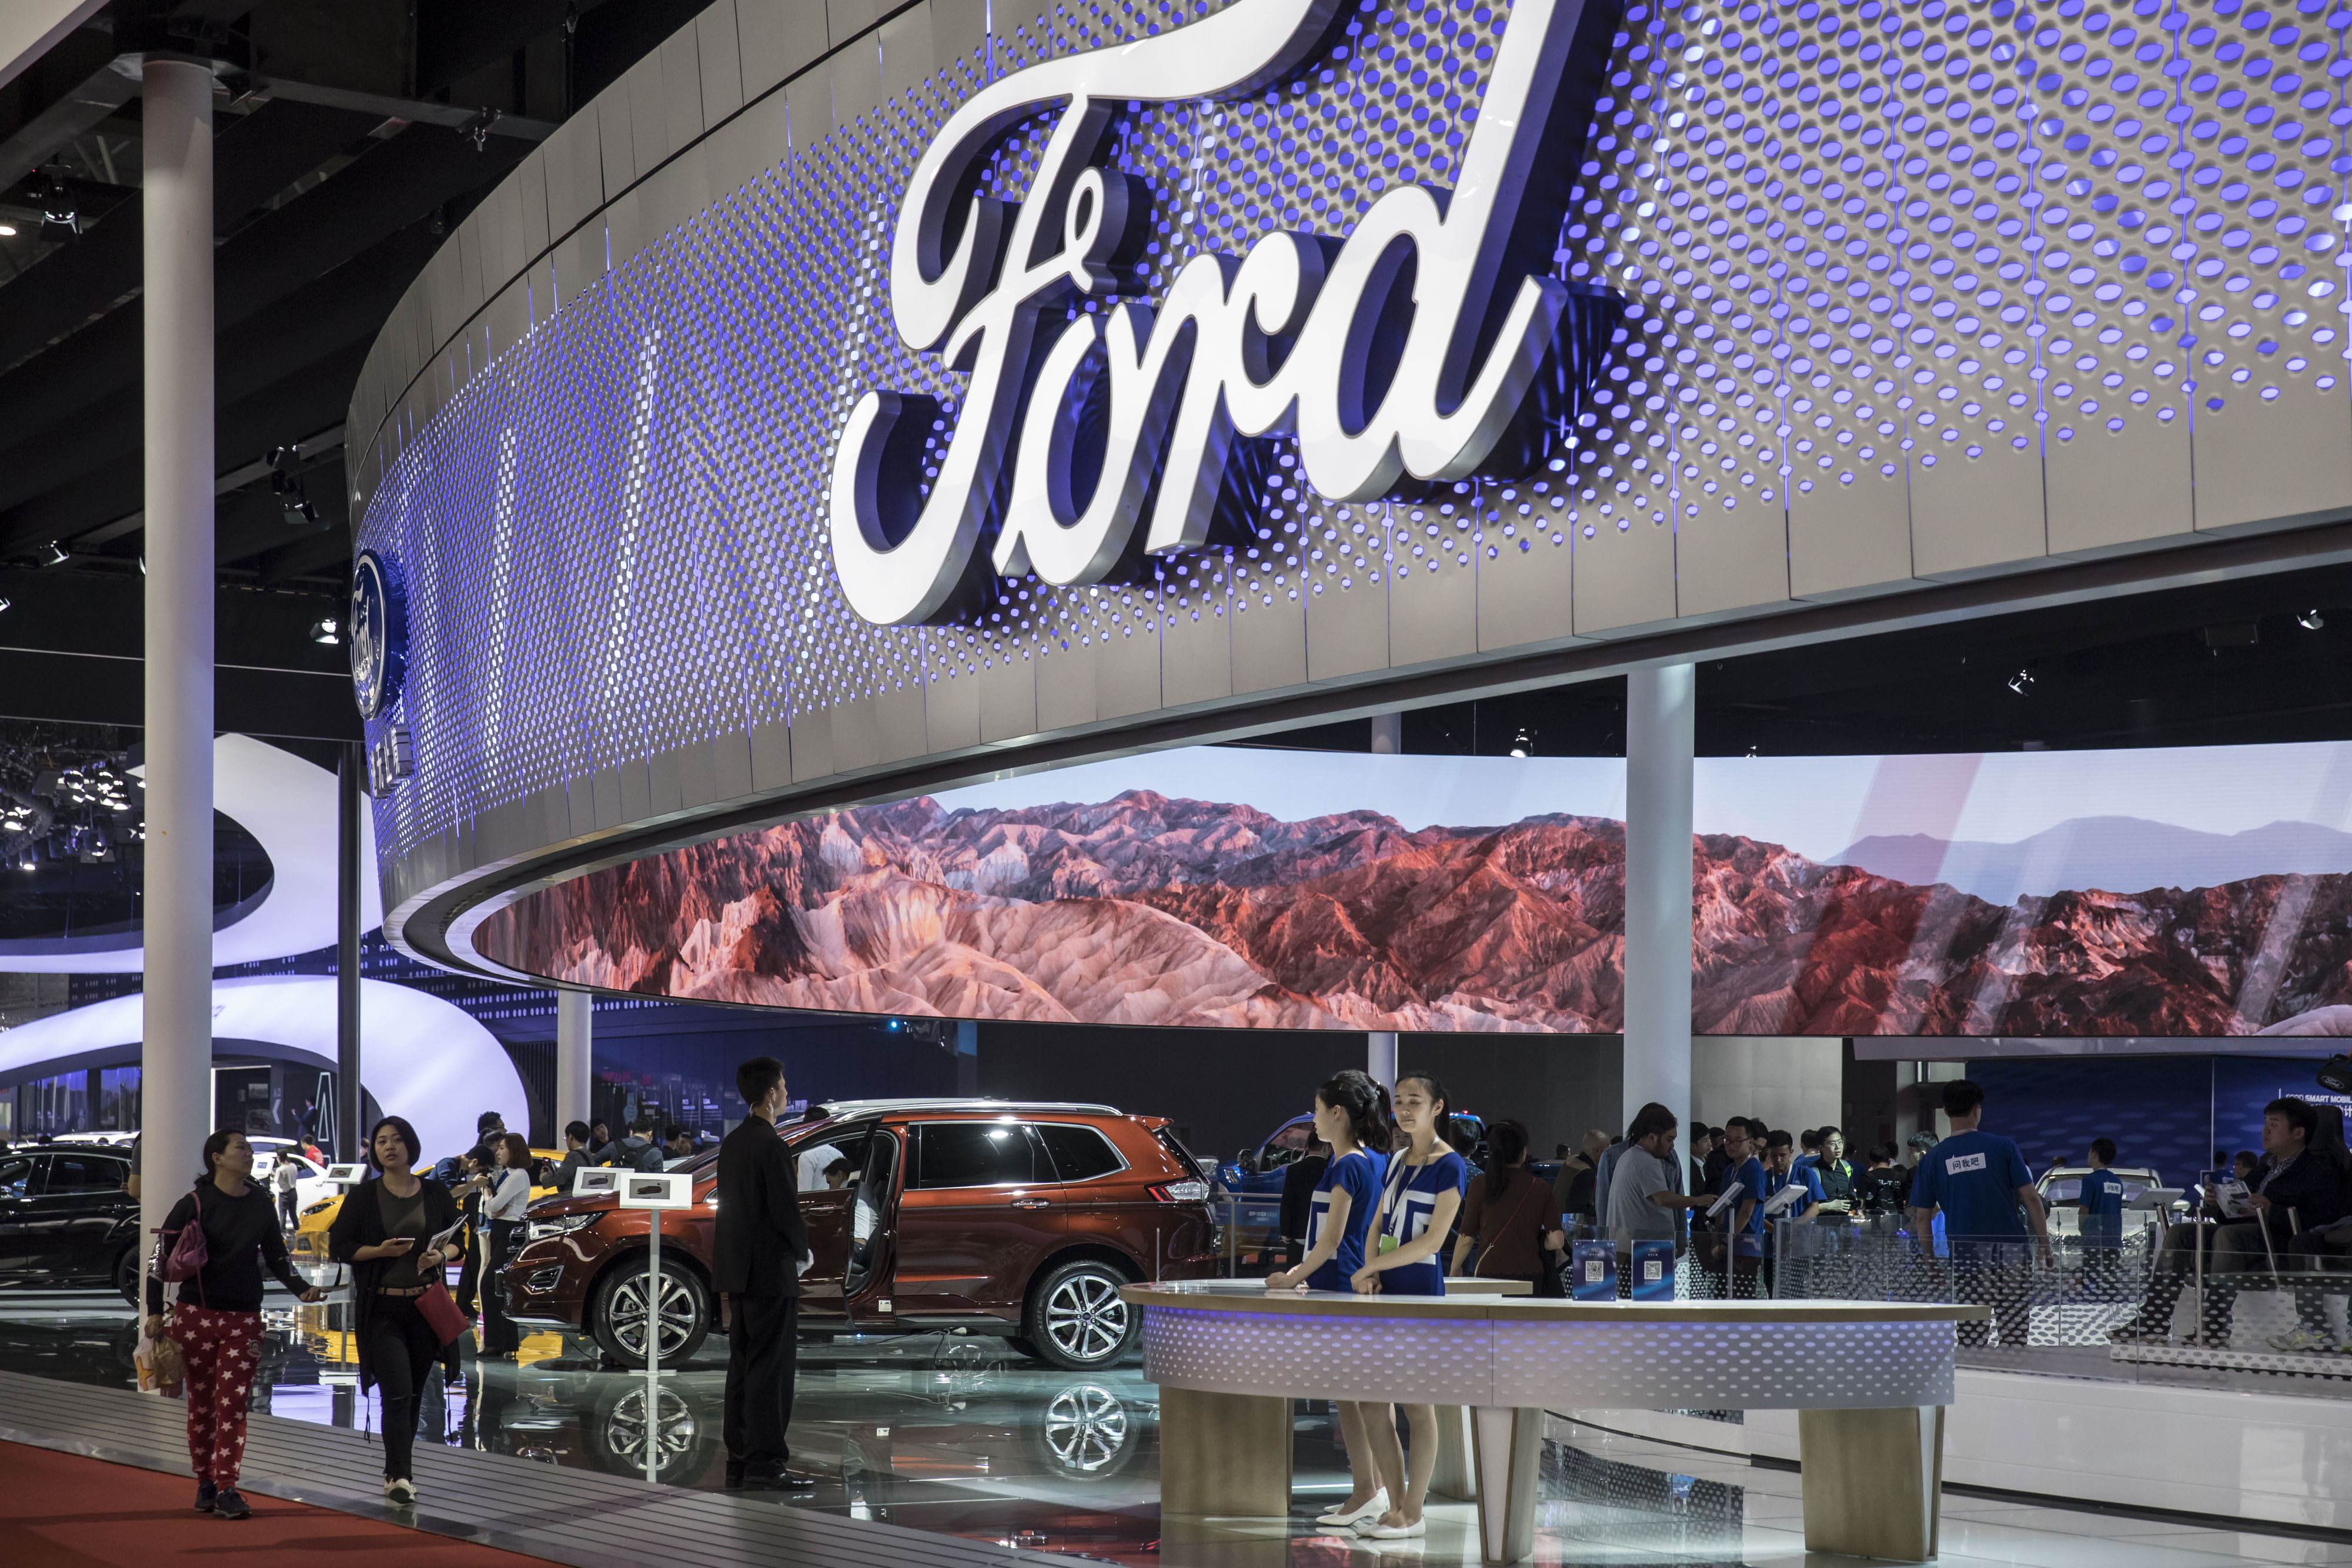 Attendees walk in the Ford Motor Co. display area at the Auto Shanghai 2017 vehicle show in Shanghai, China, on Thursday, April 20, 2017. (Qilai Shen/Bloomberg via Getty Images)